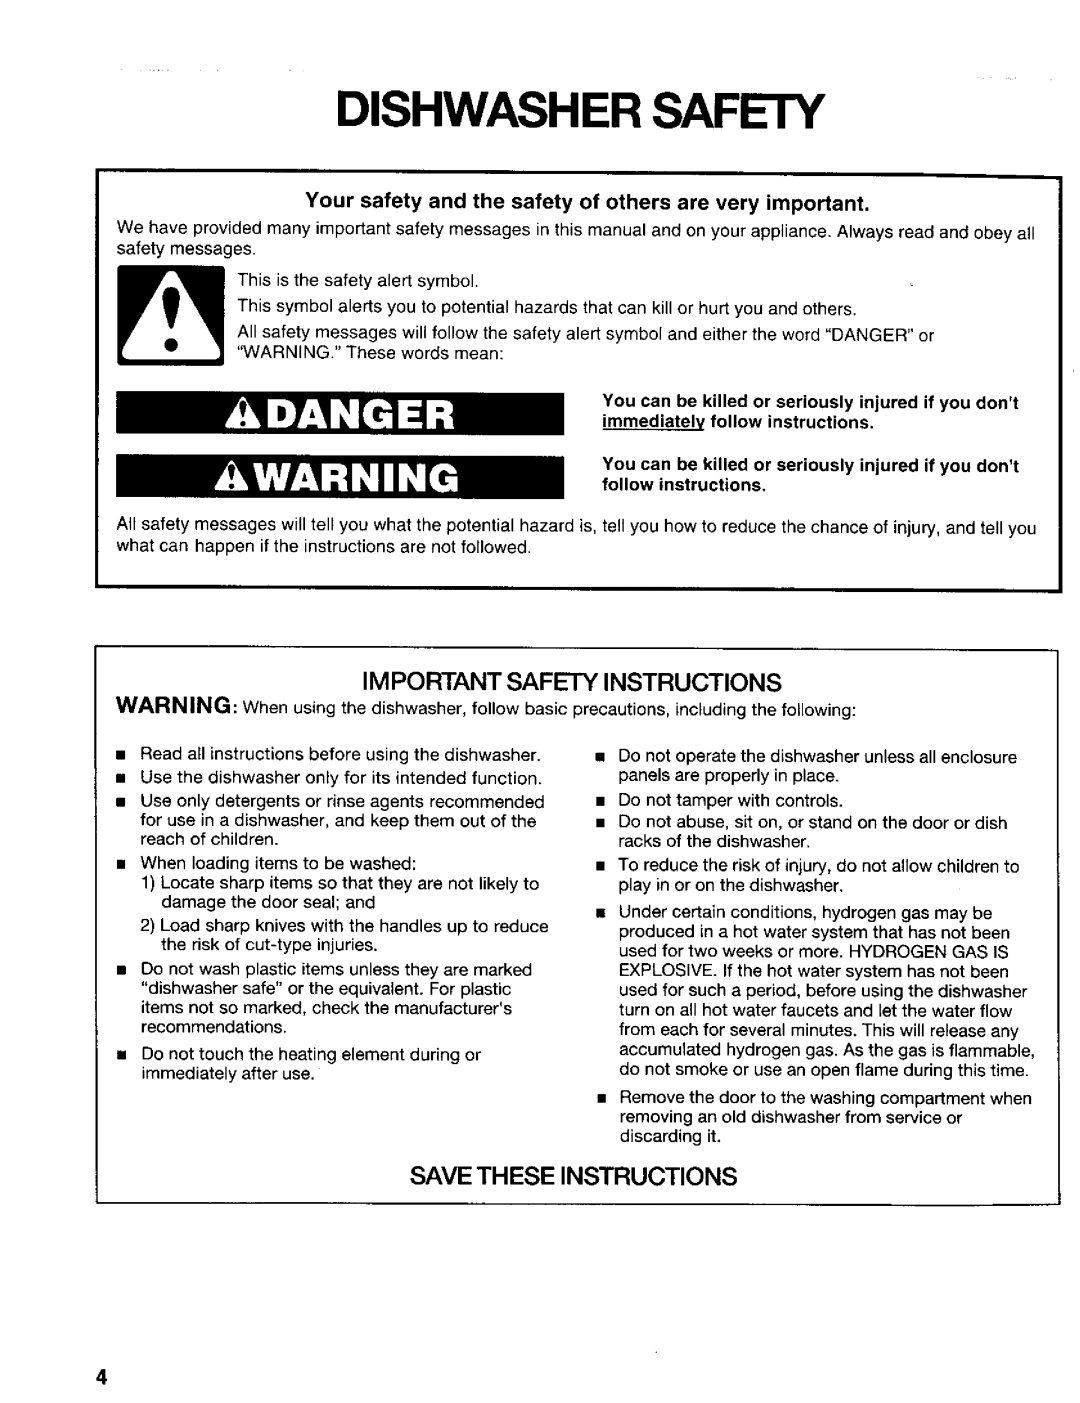 Kenmore 665.17422, 665.17425 manual Dishwasher Safety, Im Portant Safety Instructions, Save These Instructions 